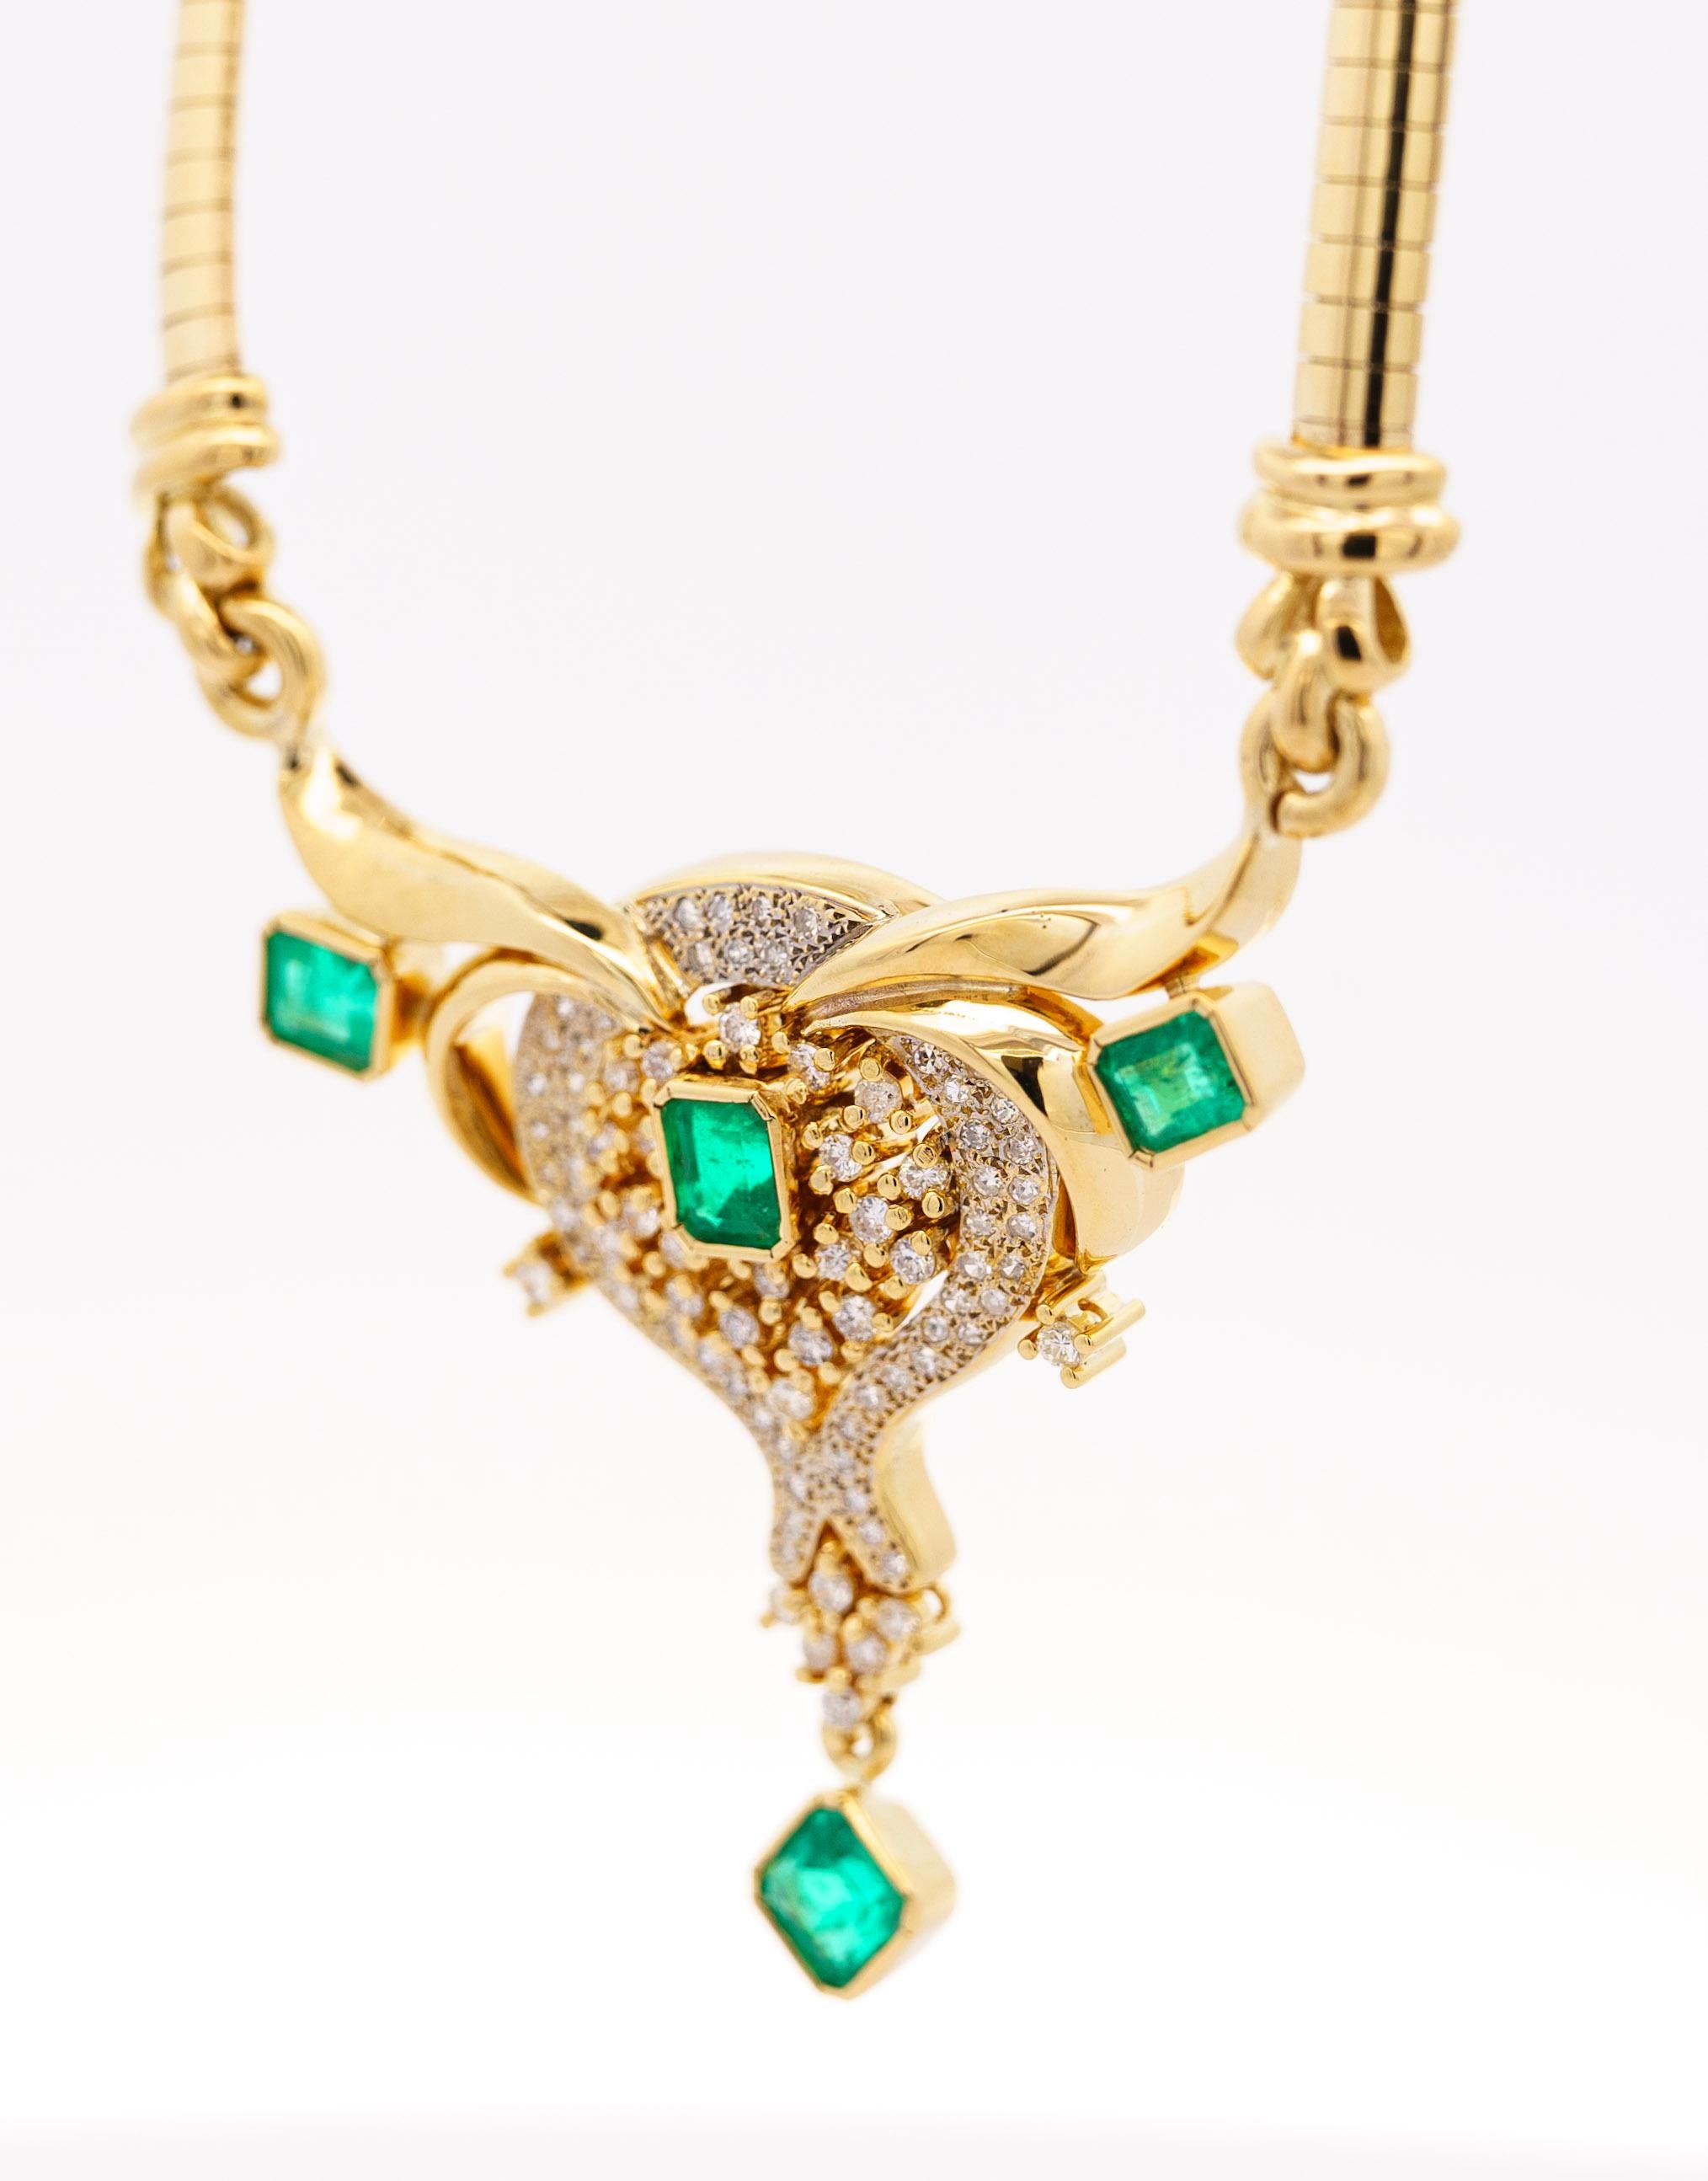 Women's Vintage 5 Carat Emerald & Diamond Necklace in 14K Yellow Gold For Sale